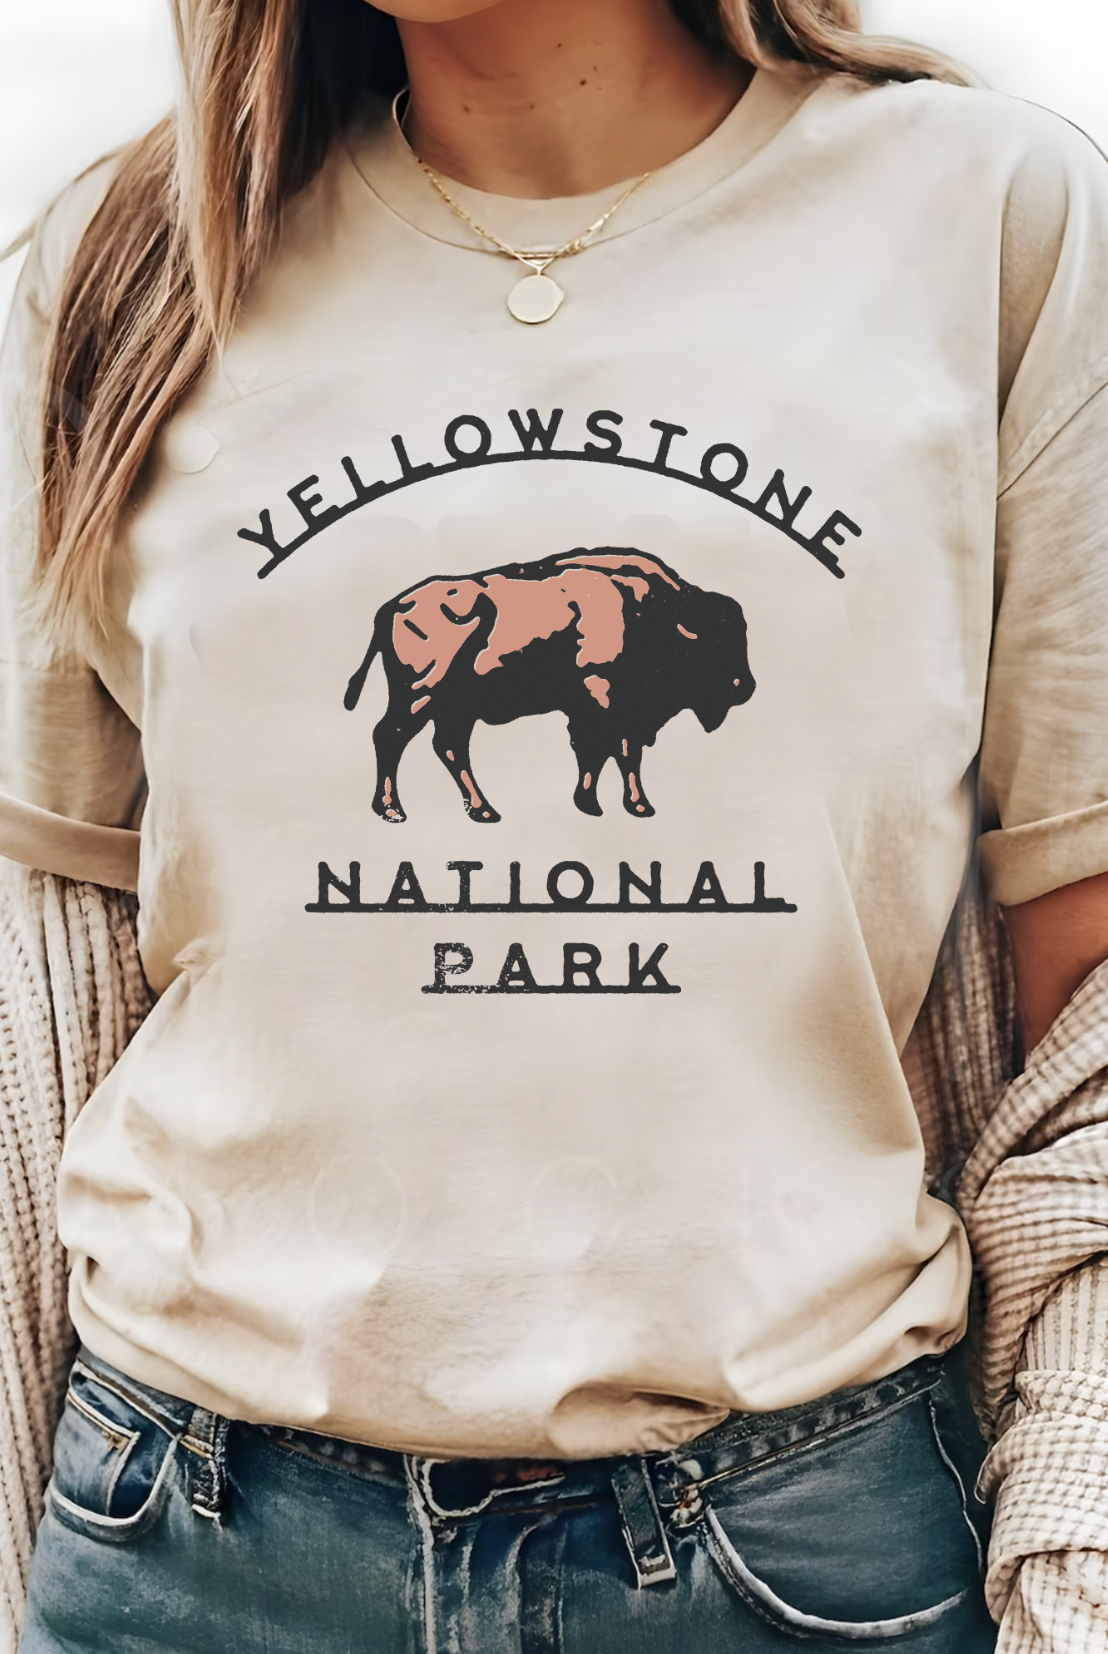 Yellowstone National Park Vintage Country Western Girl Tshirt. Bella and Canvas. Hand made and shipped from Texas. Color is Cream.